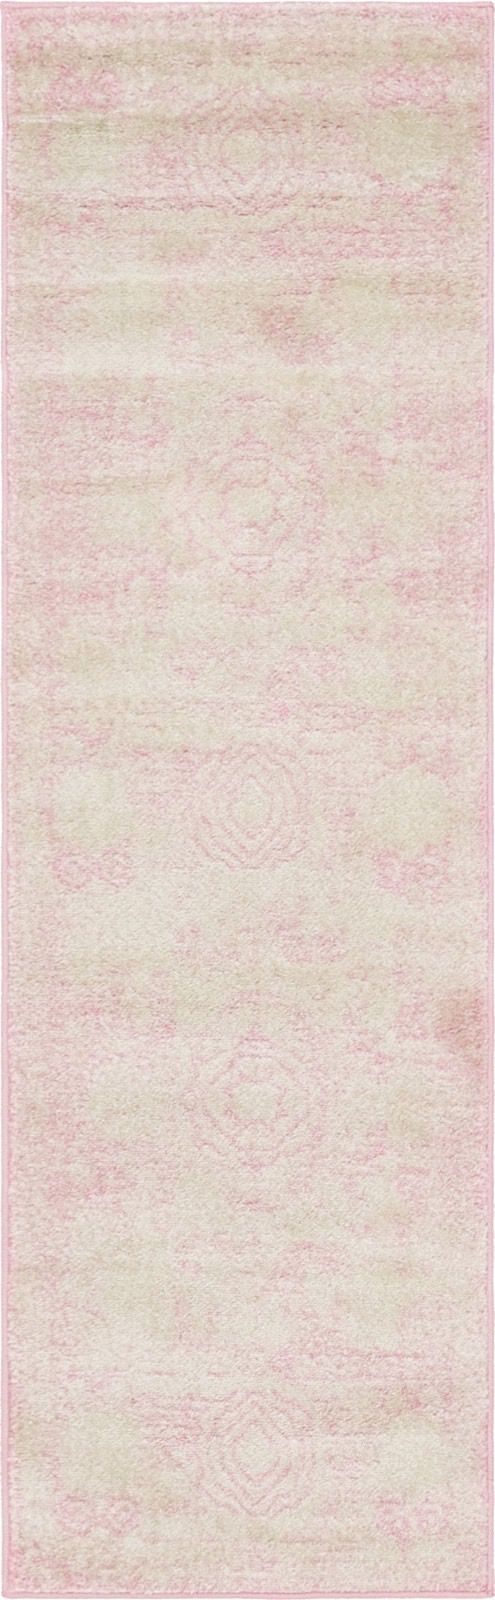 rugpal vienna traditional area rug collection